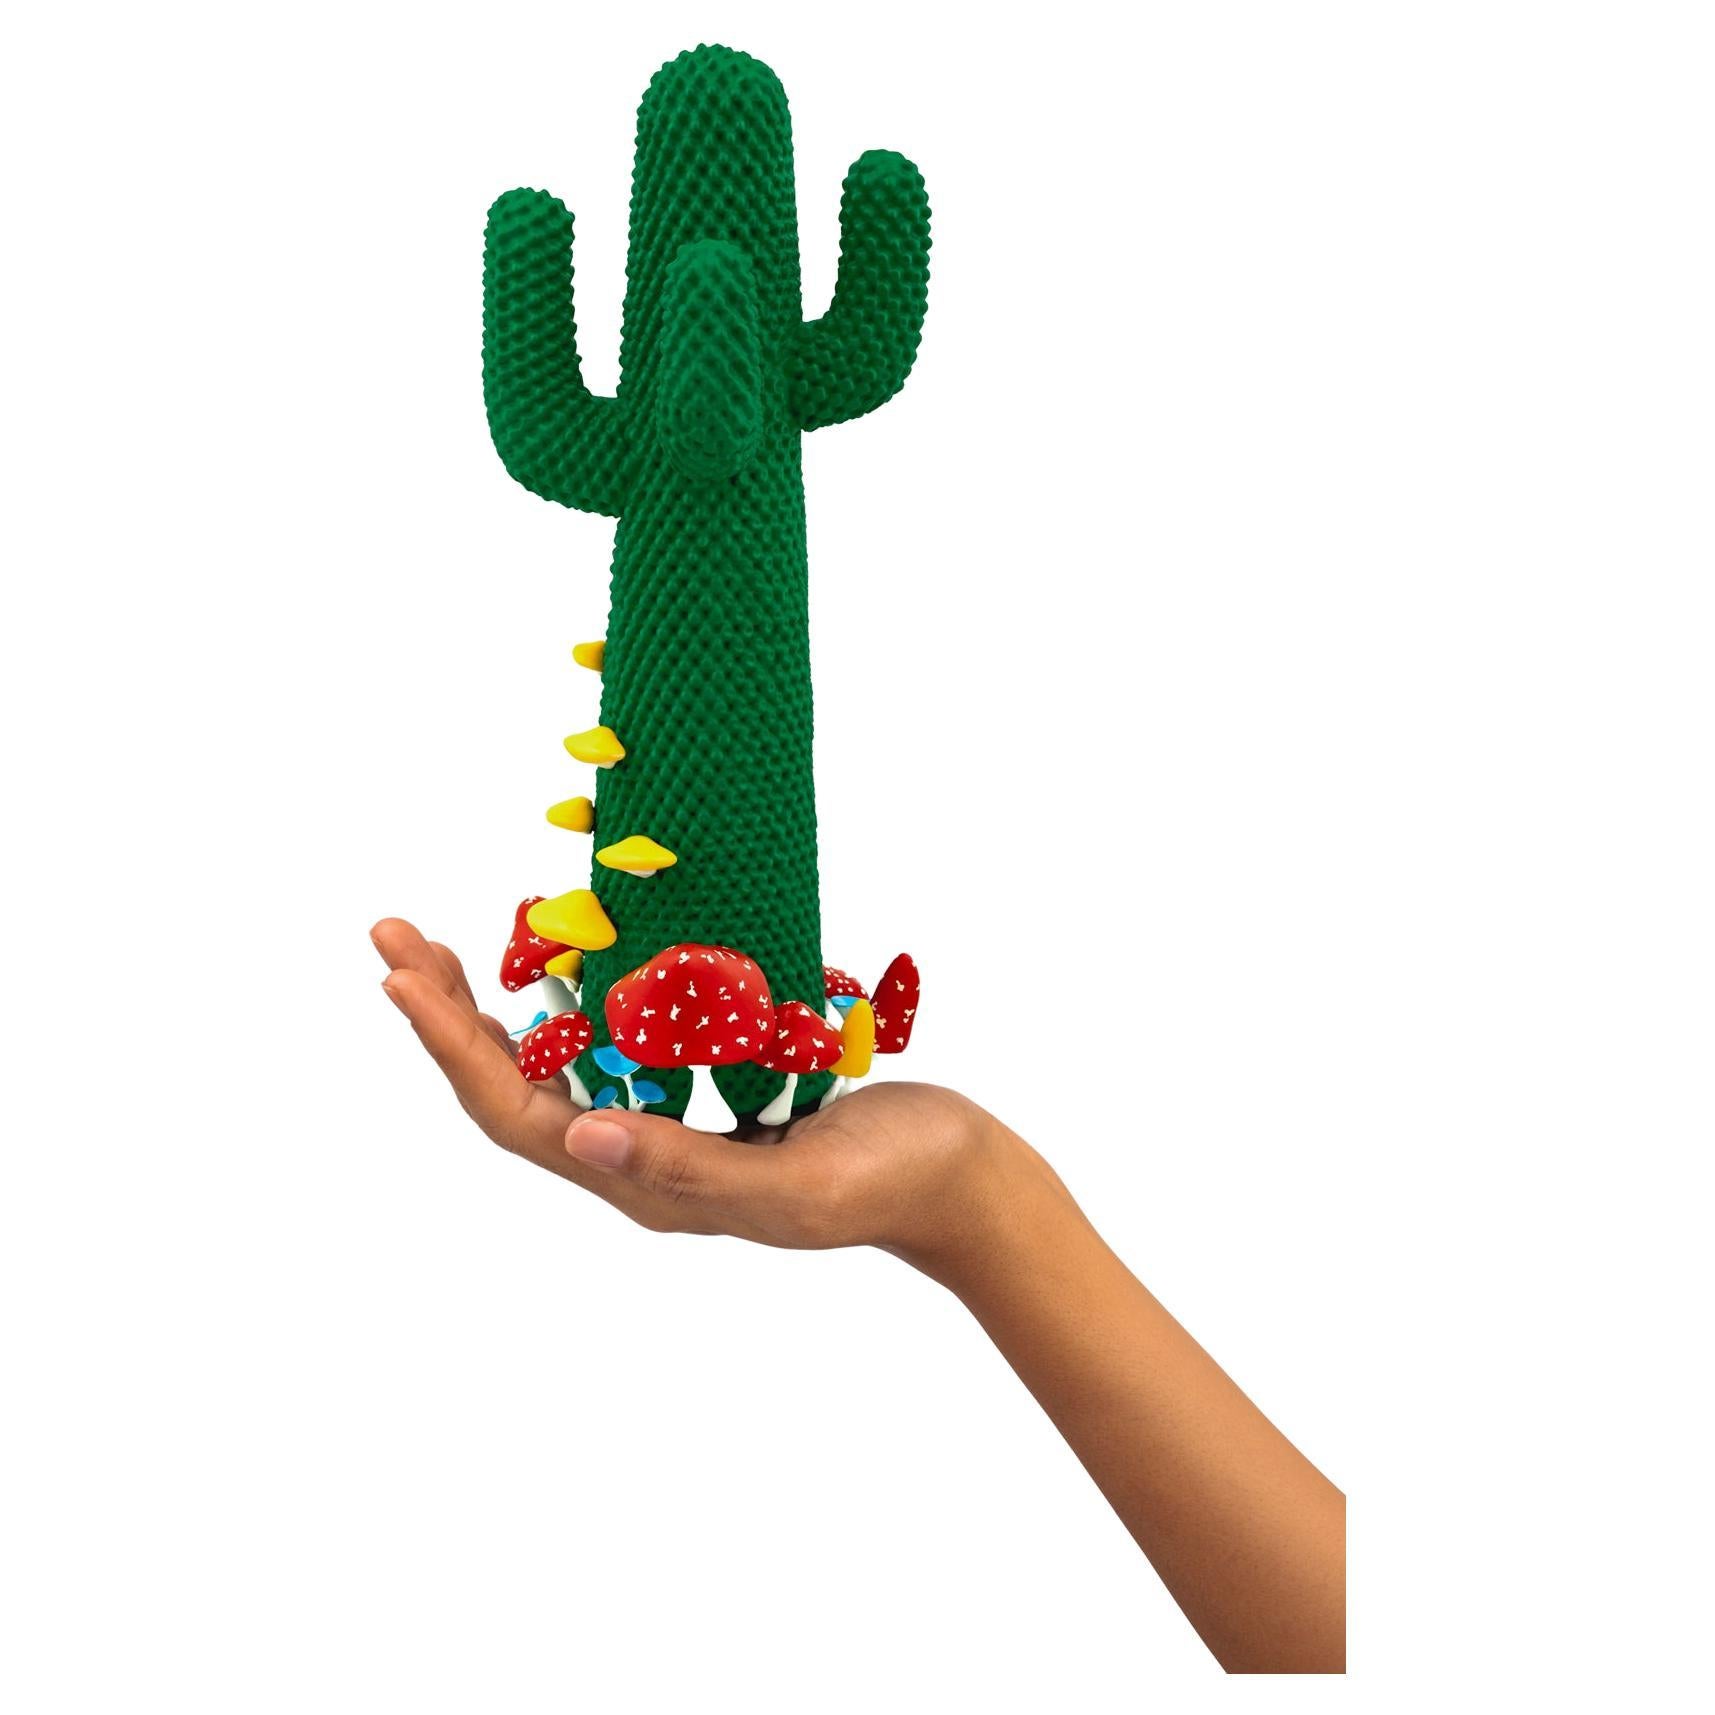 Limited Edition #74/99

Gufram presents the miniaturised version of the Shroom CACTUS® created in collaboration with A$AP Rocky and the artist’s new design studio HOMMEMADE Exactly as the real-size Shroom CACTUS®, the new Guframini piece features